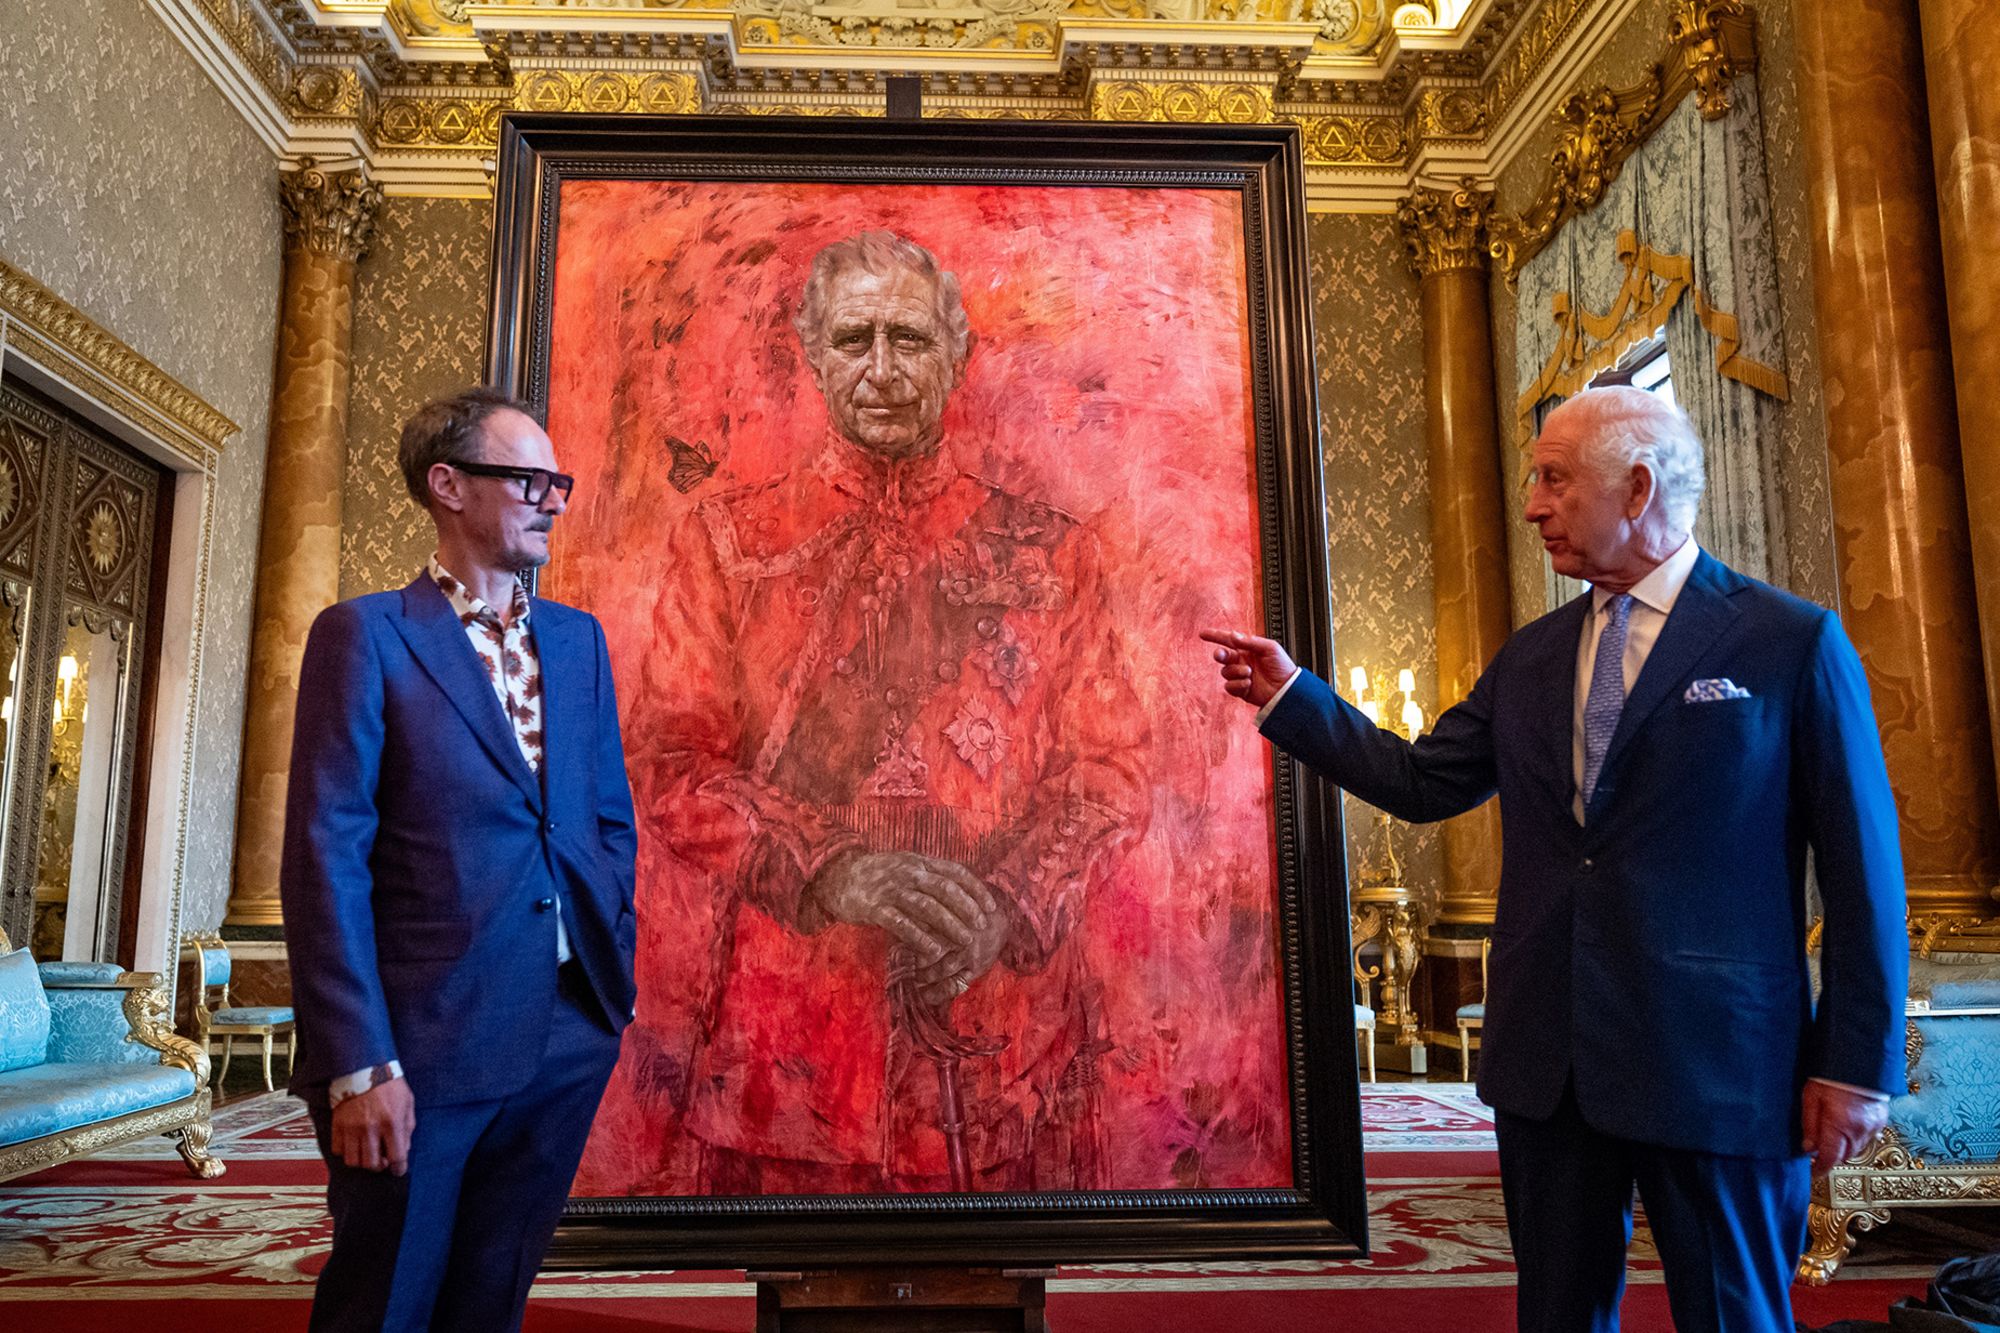 Britain's King Charles III, right, stands alongside artist Jonathan Yeo after unveiling an official portrait of himself wearing the uniform of the Welsh Guards, of which the King was made Regimental Colonel in 1975.